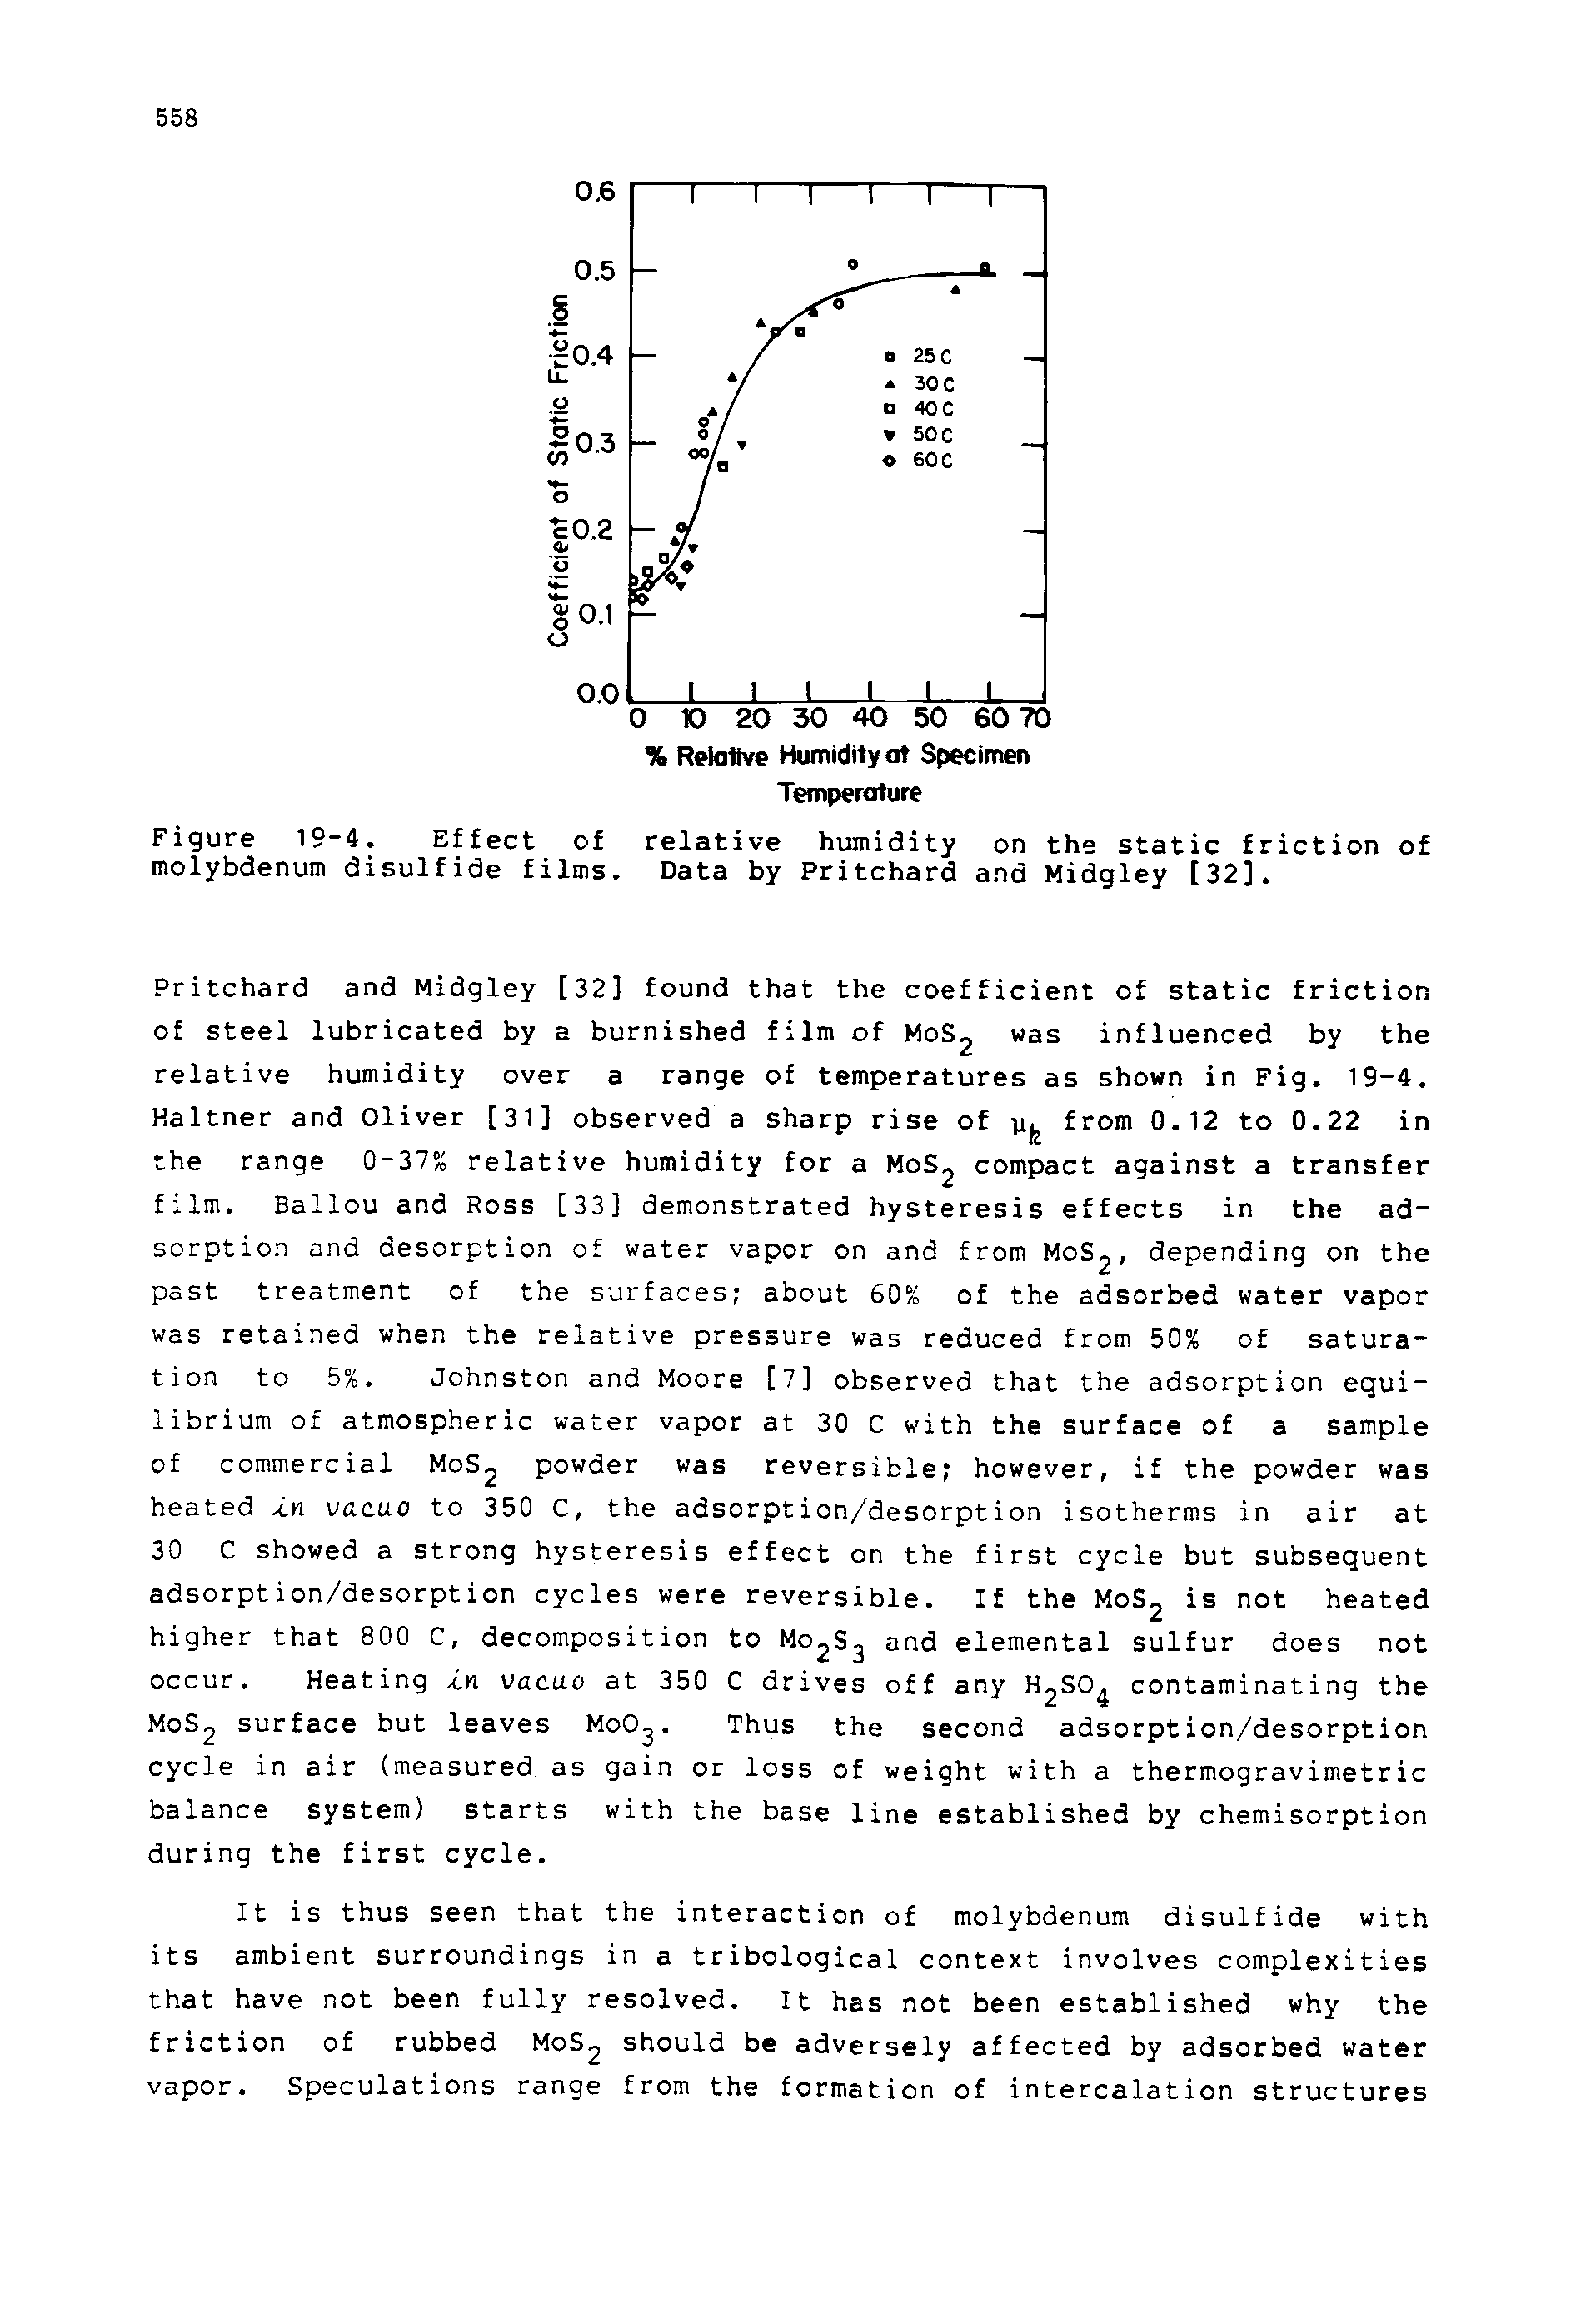 Figure 19-4. Effect of relative humidity on the static friction of molybdenum disulfide films. Data by Pritchard and Midgley [32].